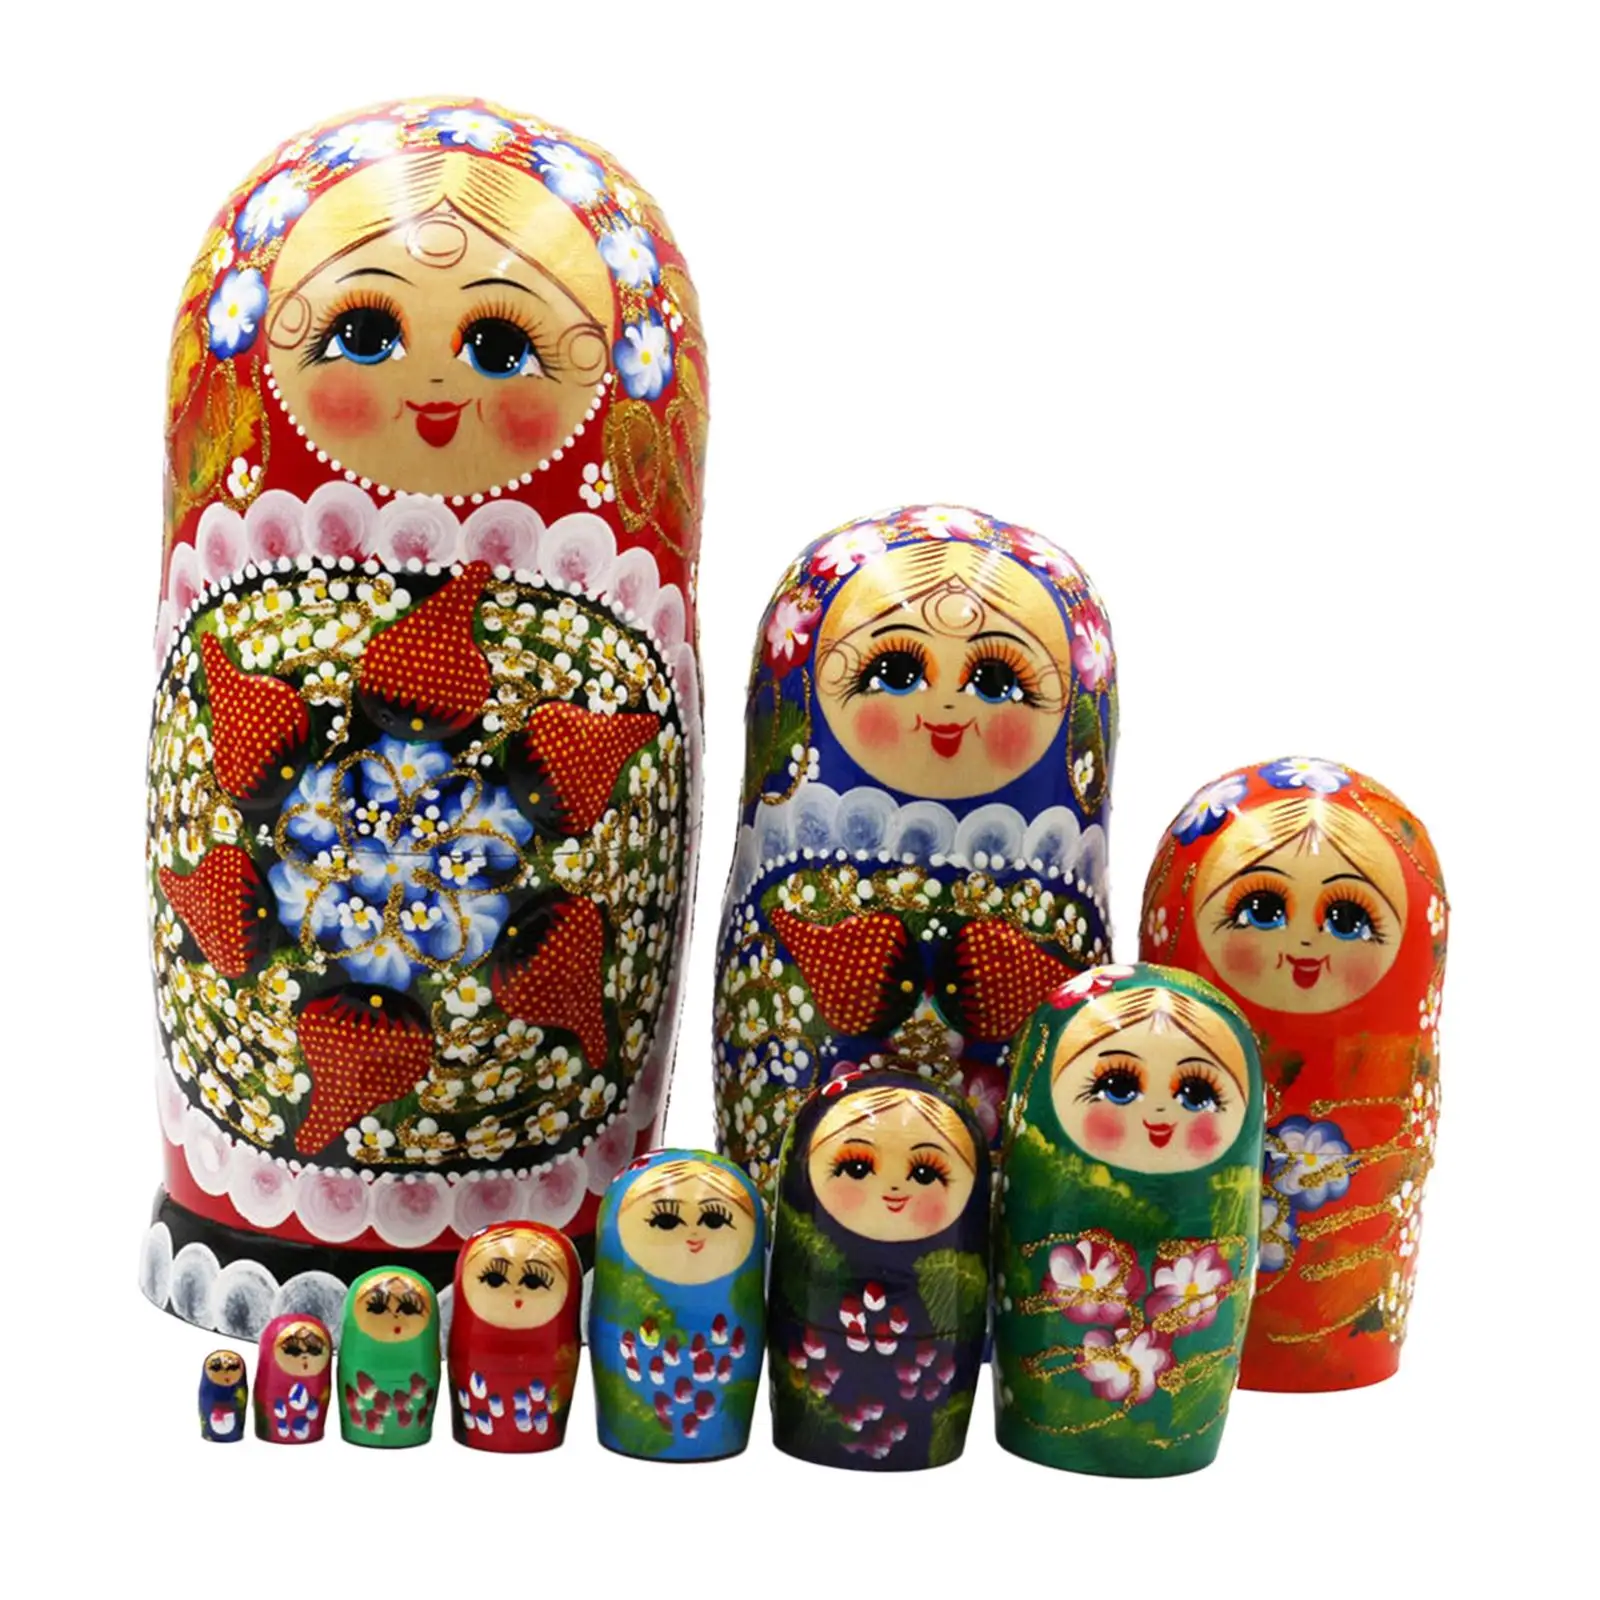 10Pcs Russian Nesting Dolls Stacking Doll Set Traditional Birthday Gifts Cute Matryoshka Handpainted for Holiday Decoration